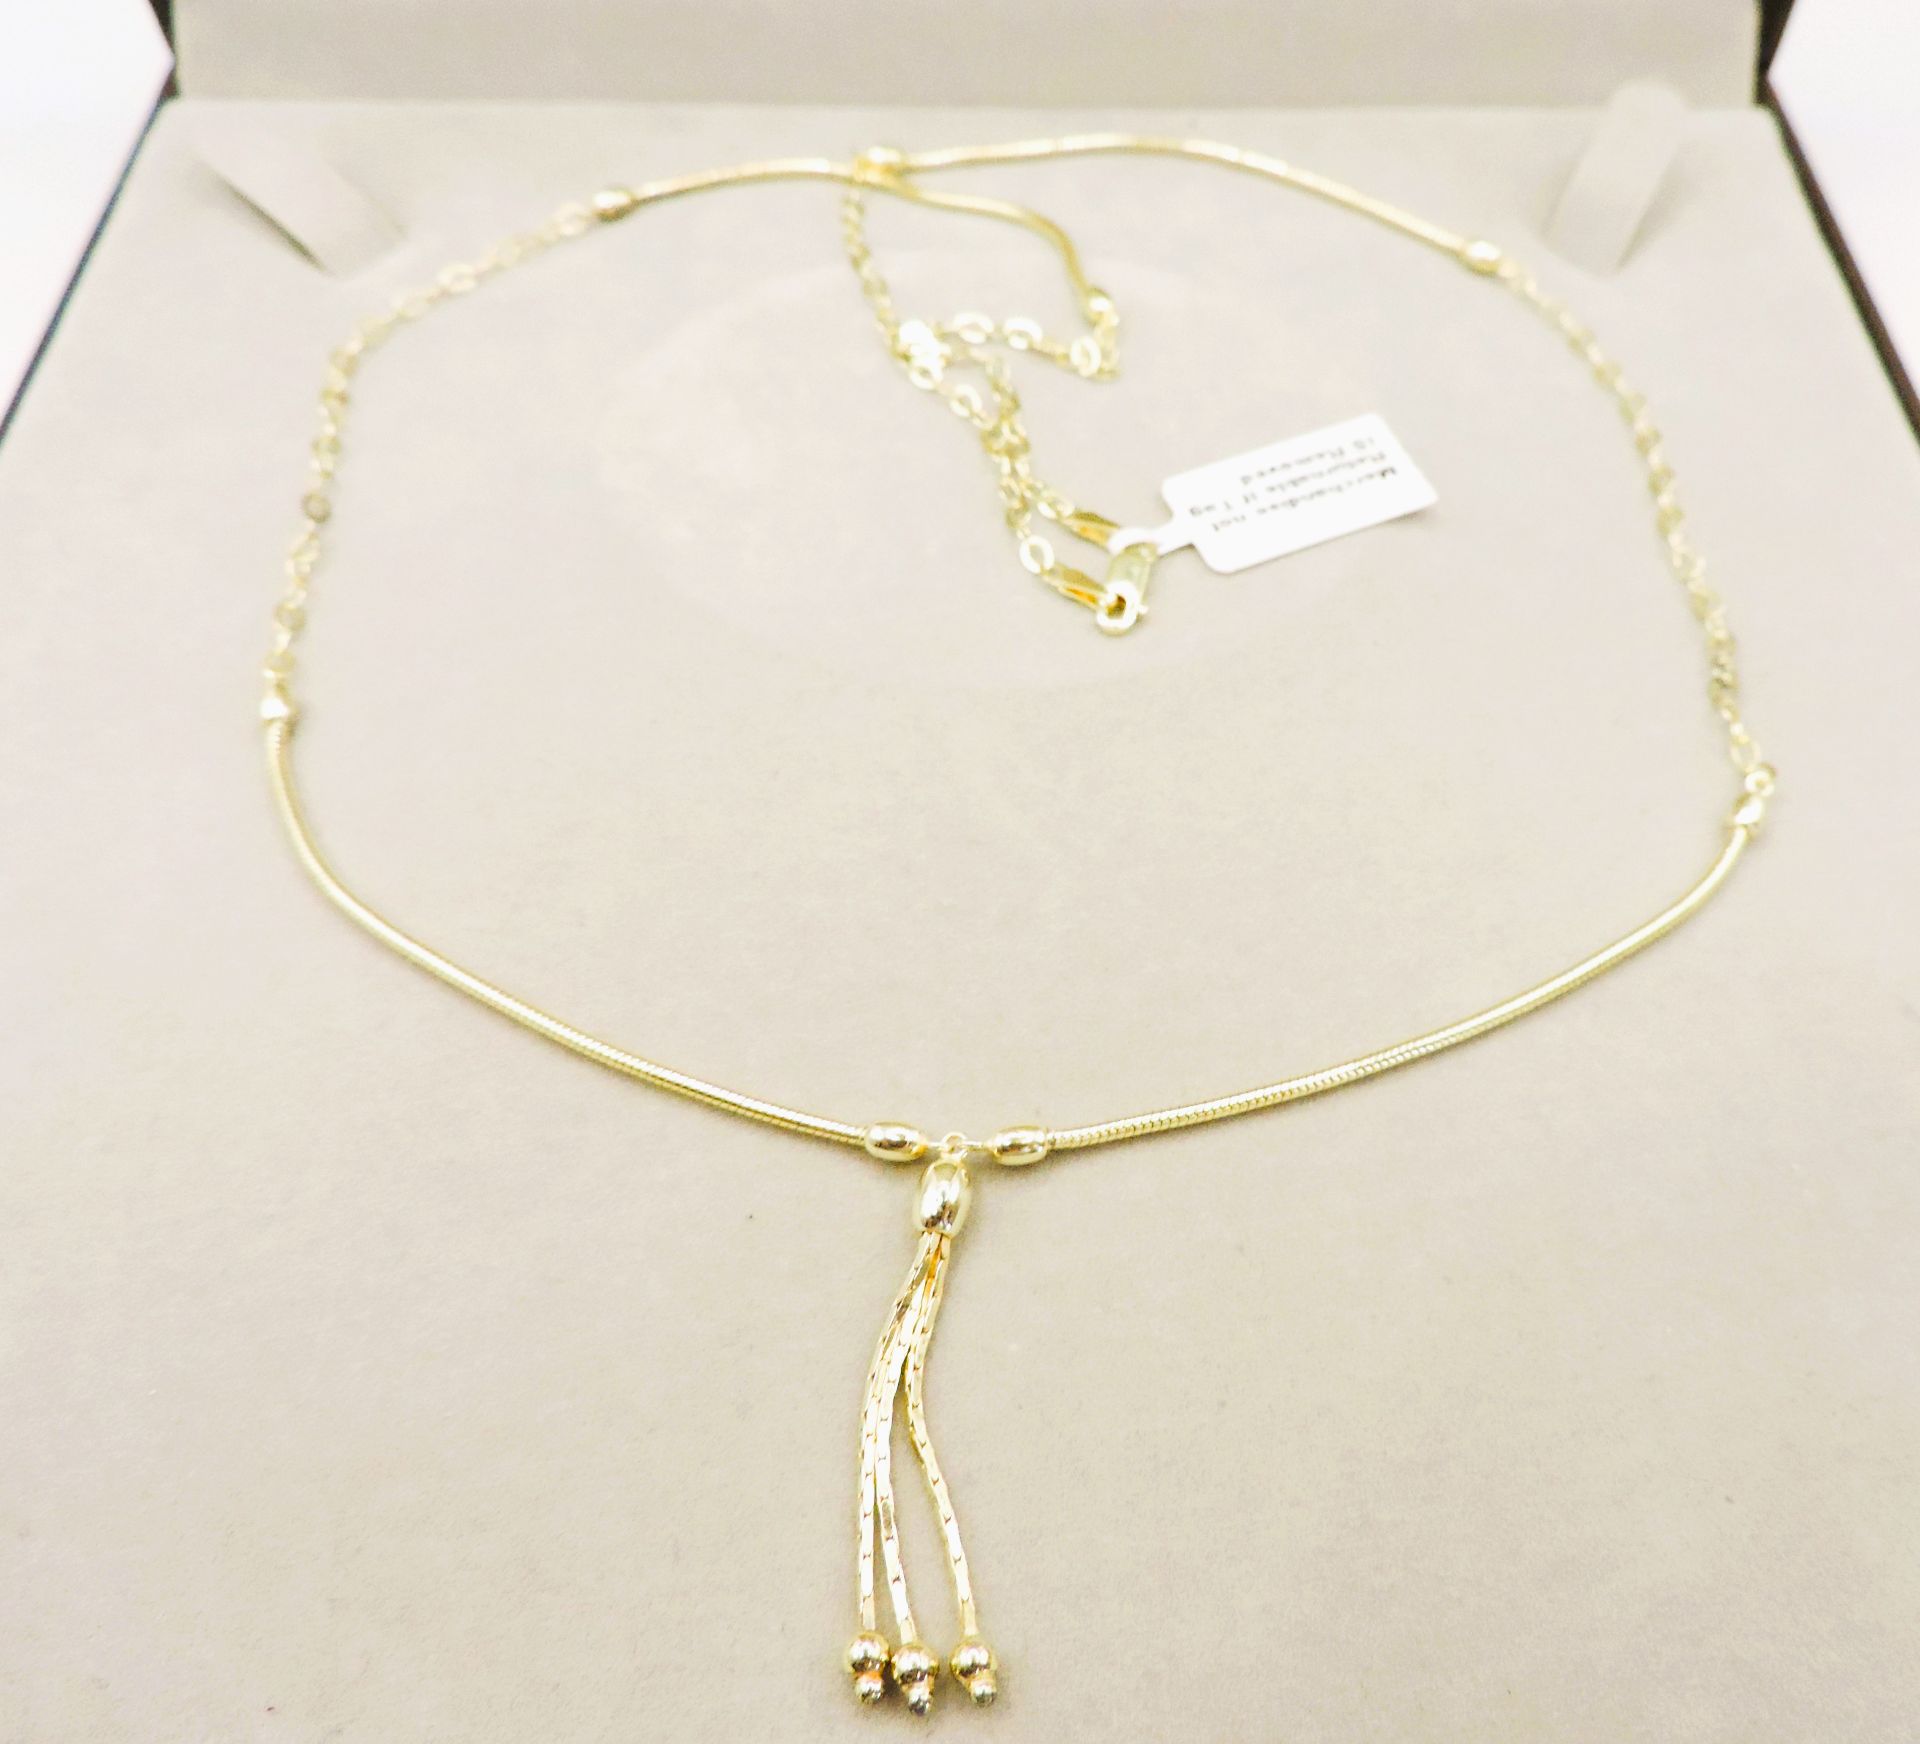 14k Gold on Sterling Silver Necklace New with Gift Box - Image 4 of 4